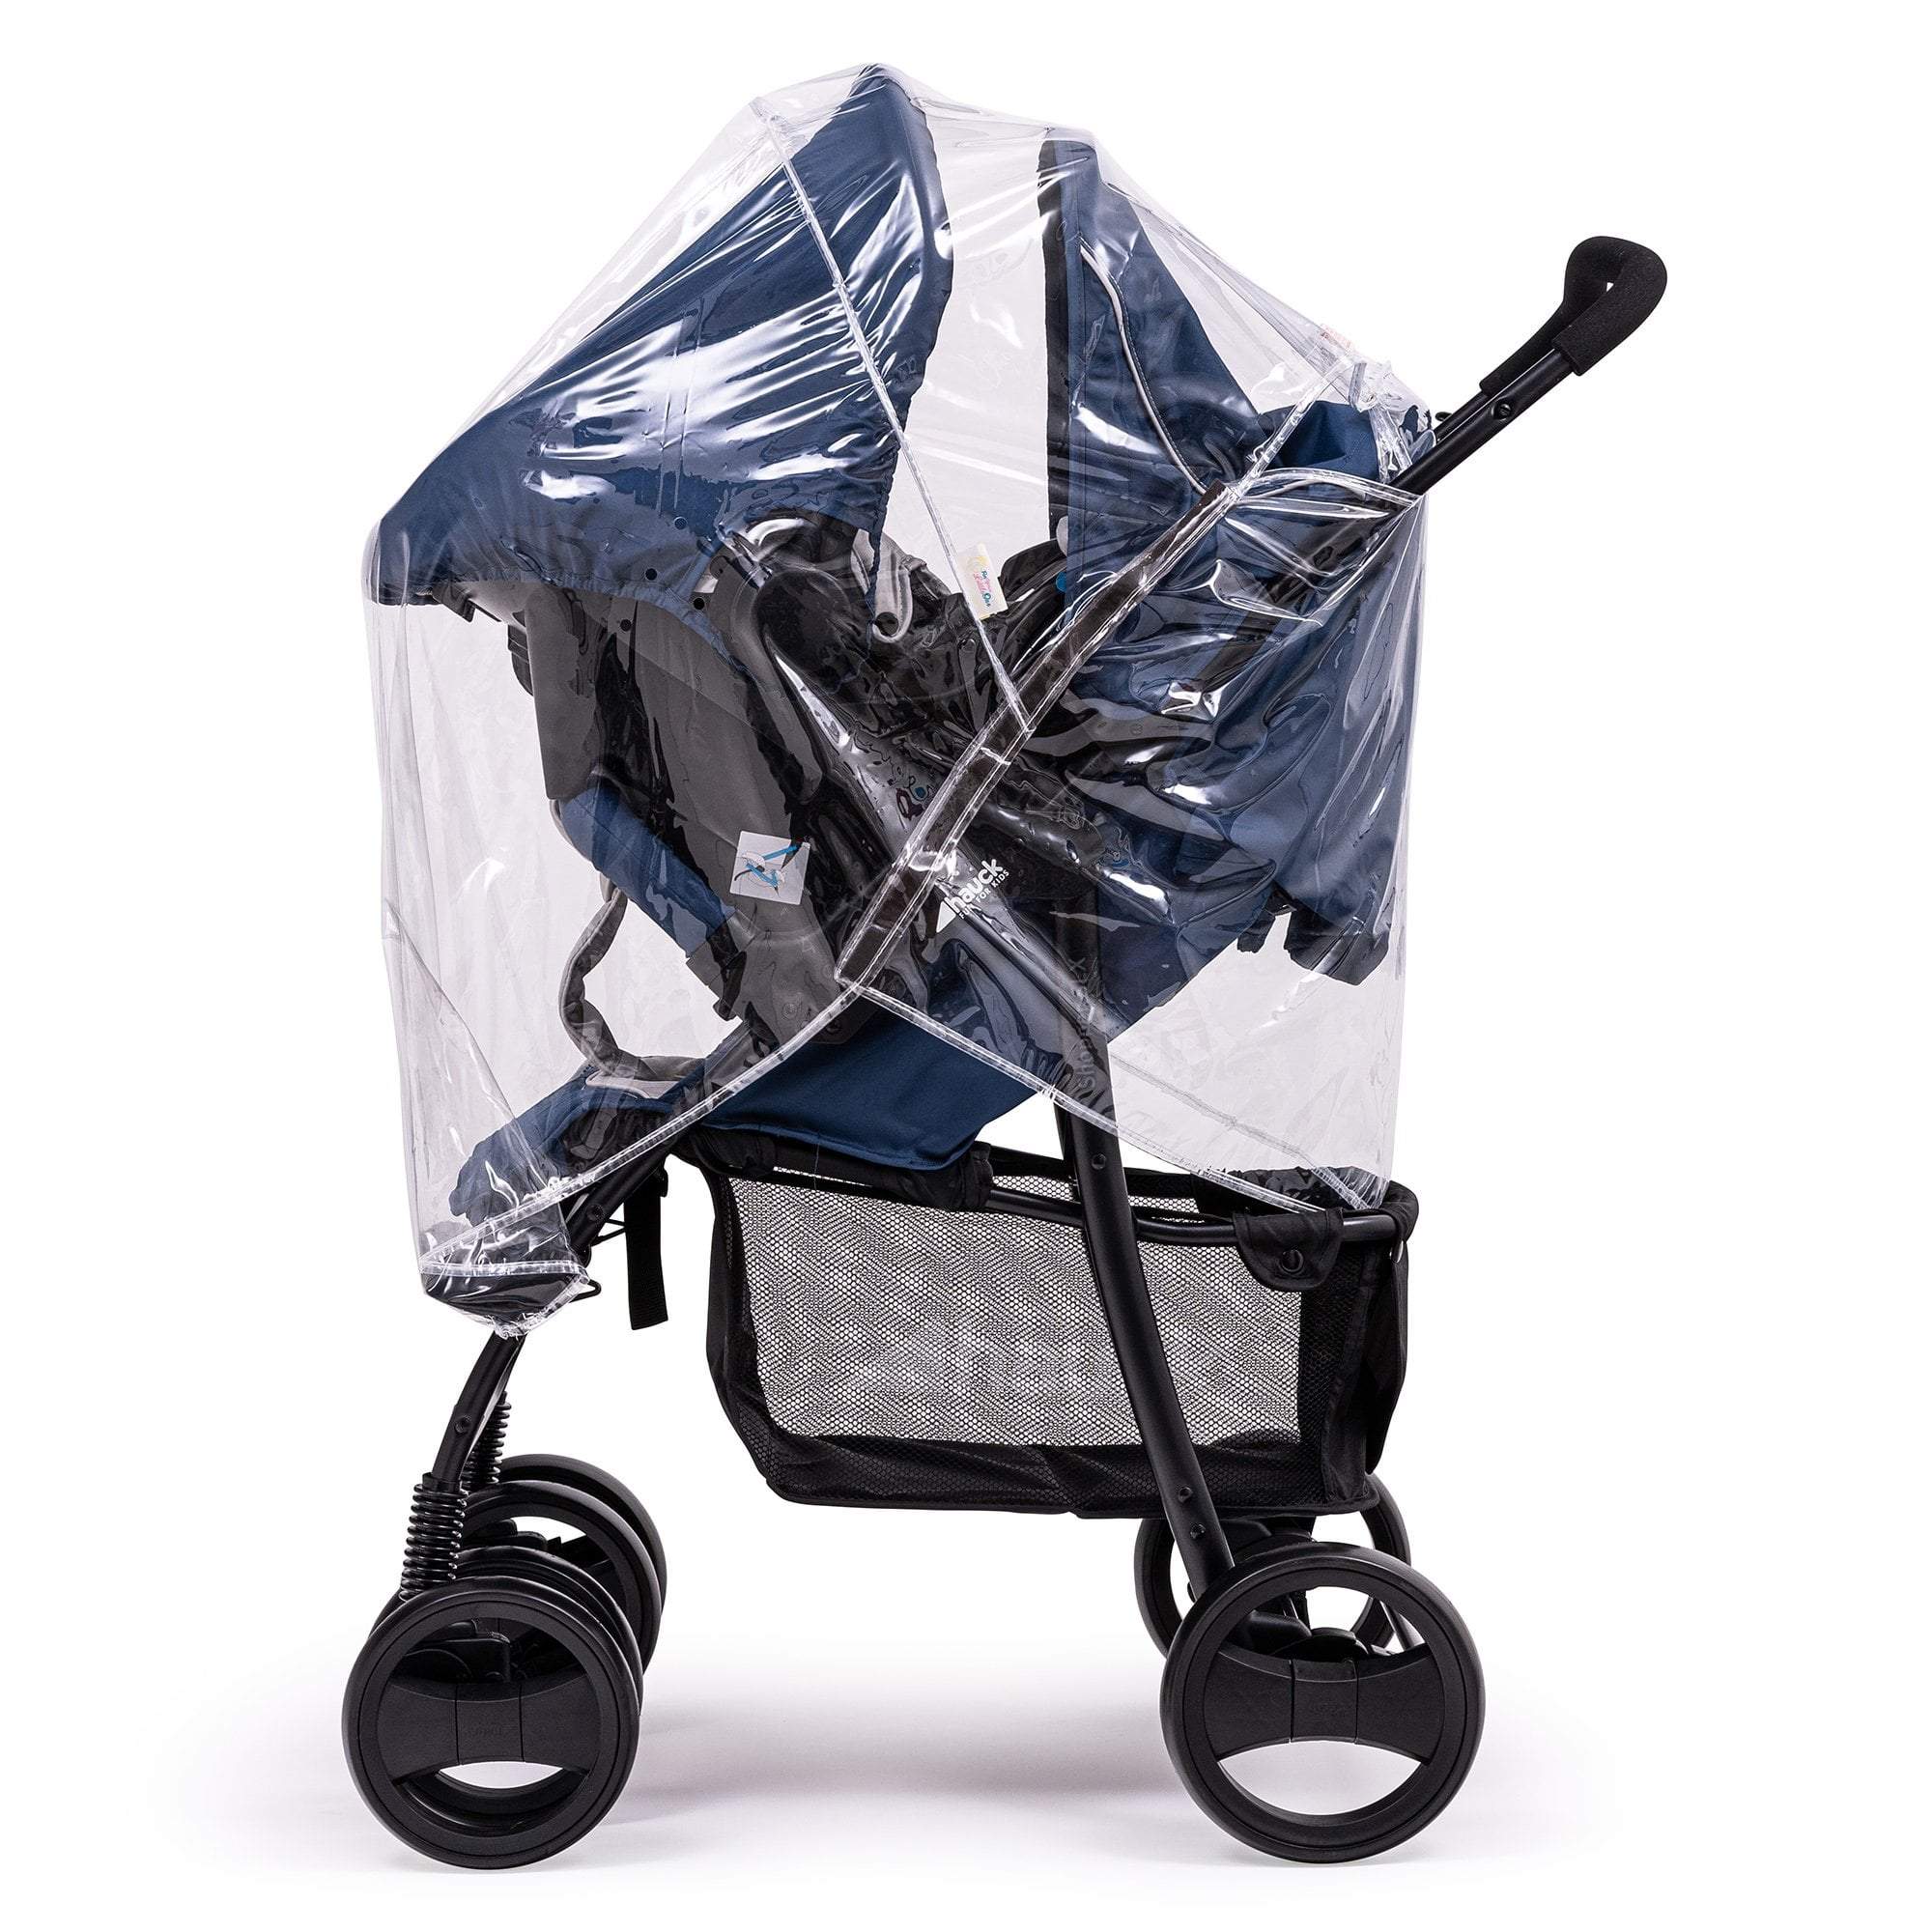 Travel System Raincover Compatible with Petite Star - Fits All Models - For Your Little One